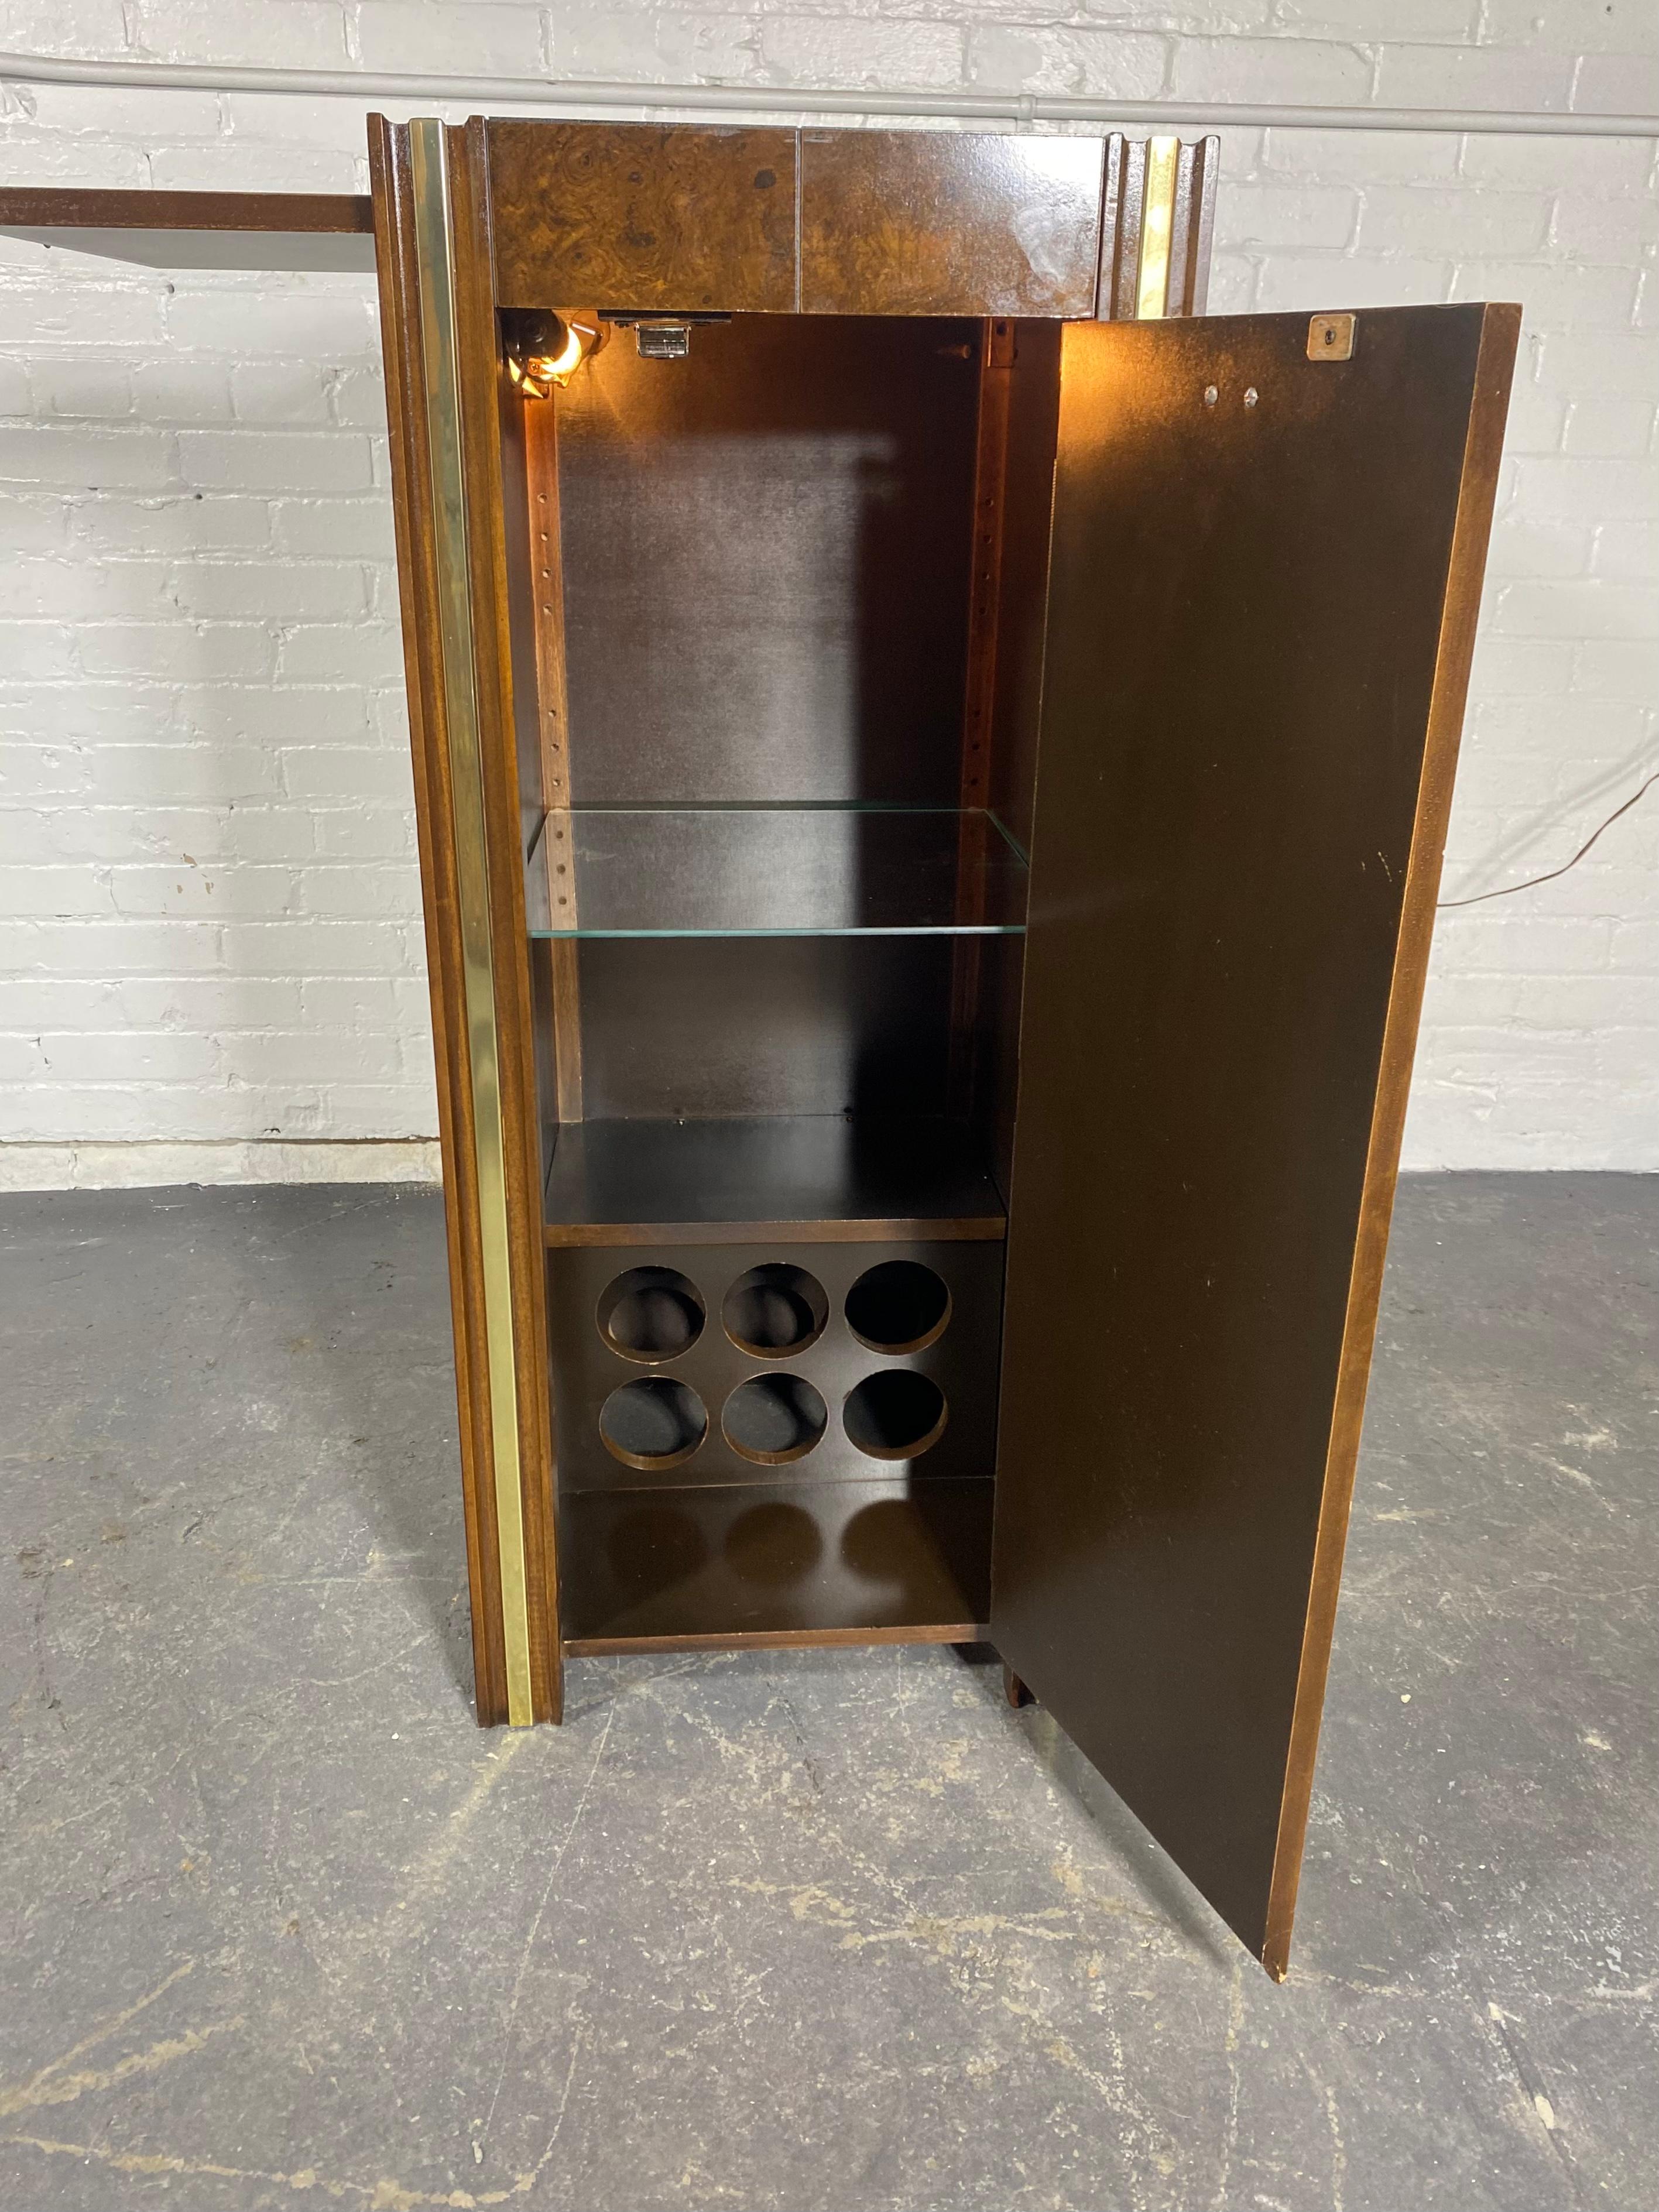 
Stunning Burl Wood and brass accents Dry Bar ,cabinet attributed to Milo Baughman. Black lacquer interior with glass shelf and lamp as well as pull-out cutting/ serving shelf.Interior bottom holds 6 bottles, Wonderful compact design. Hand delivery